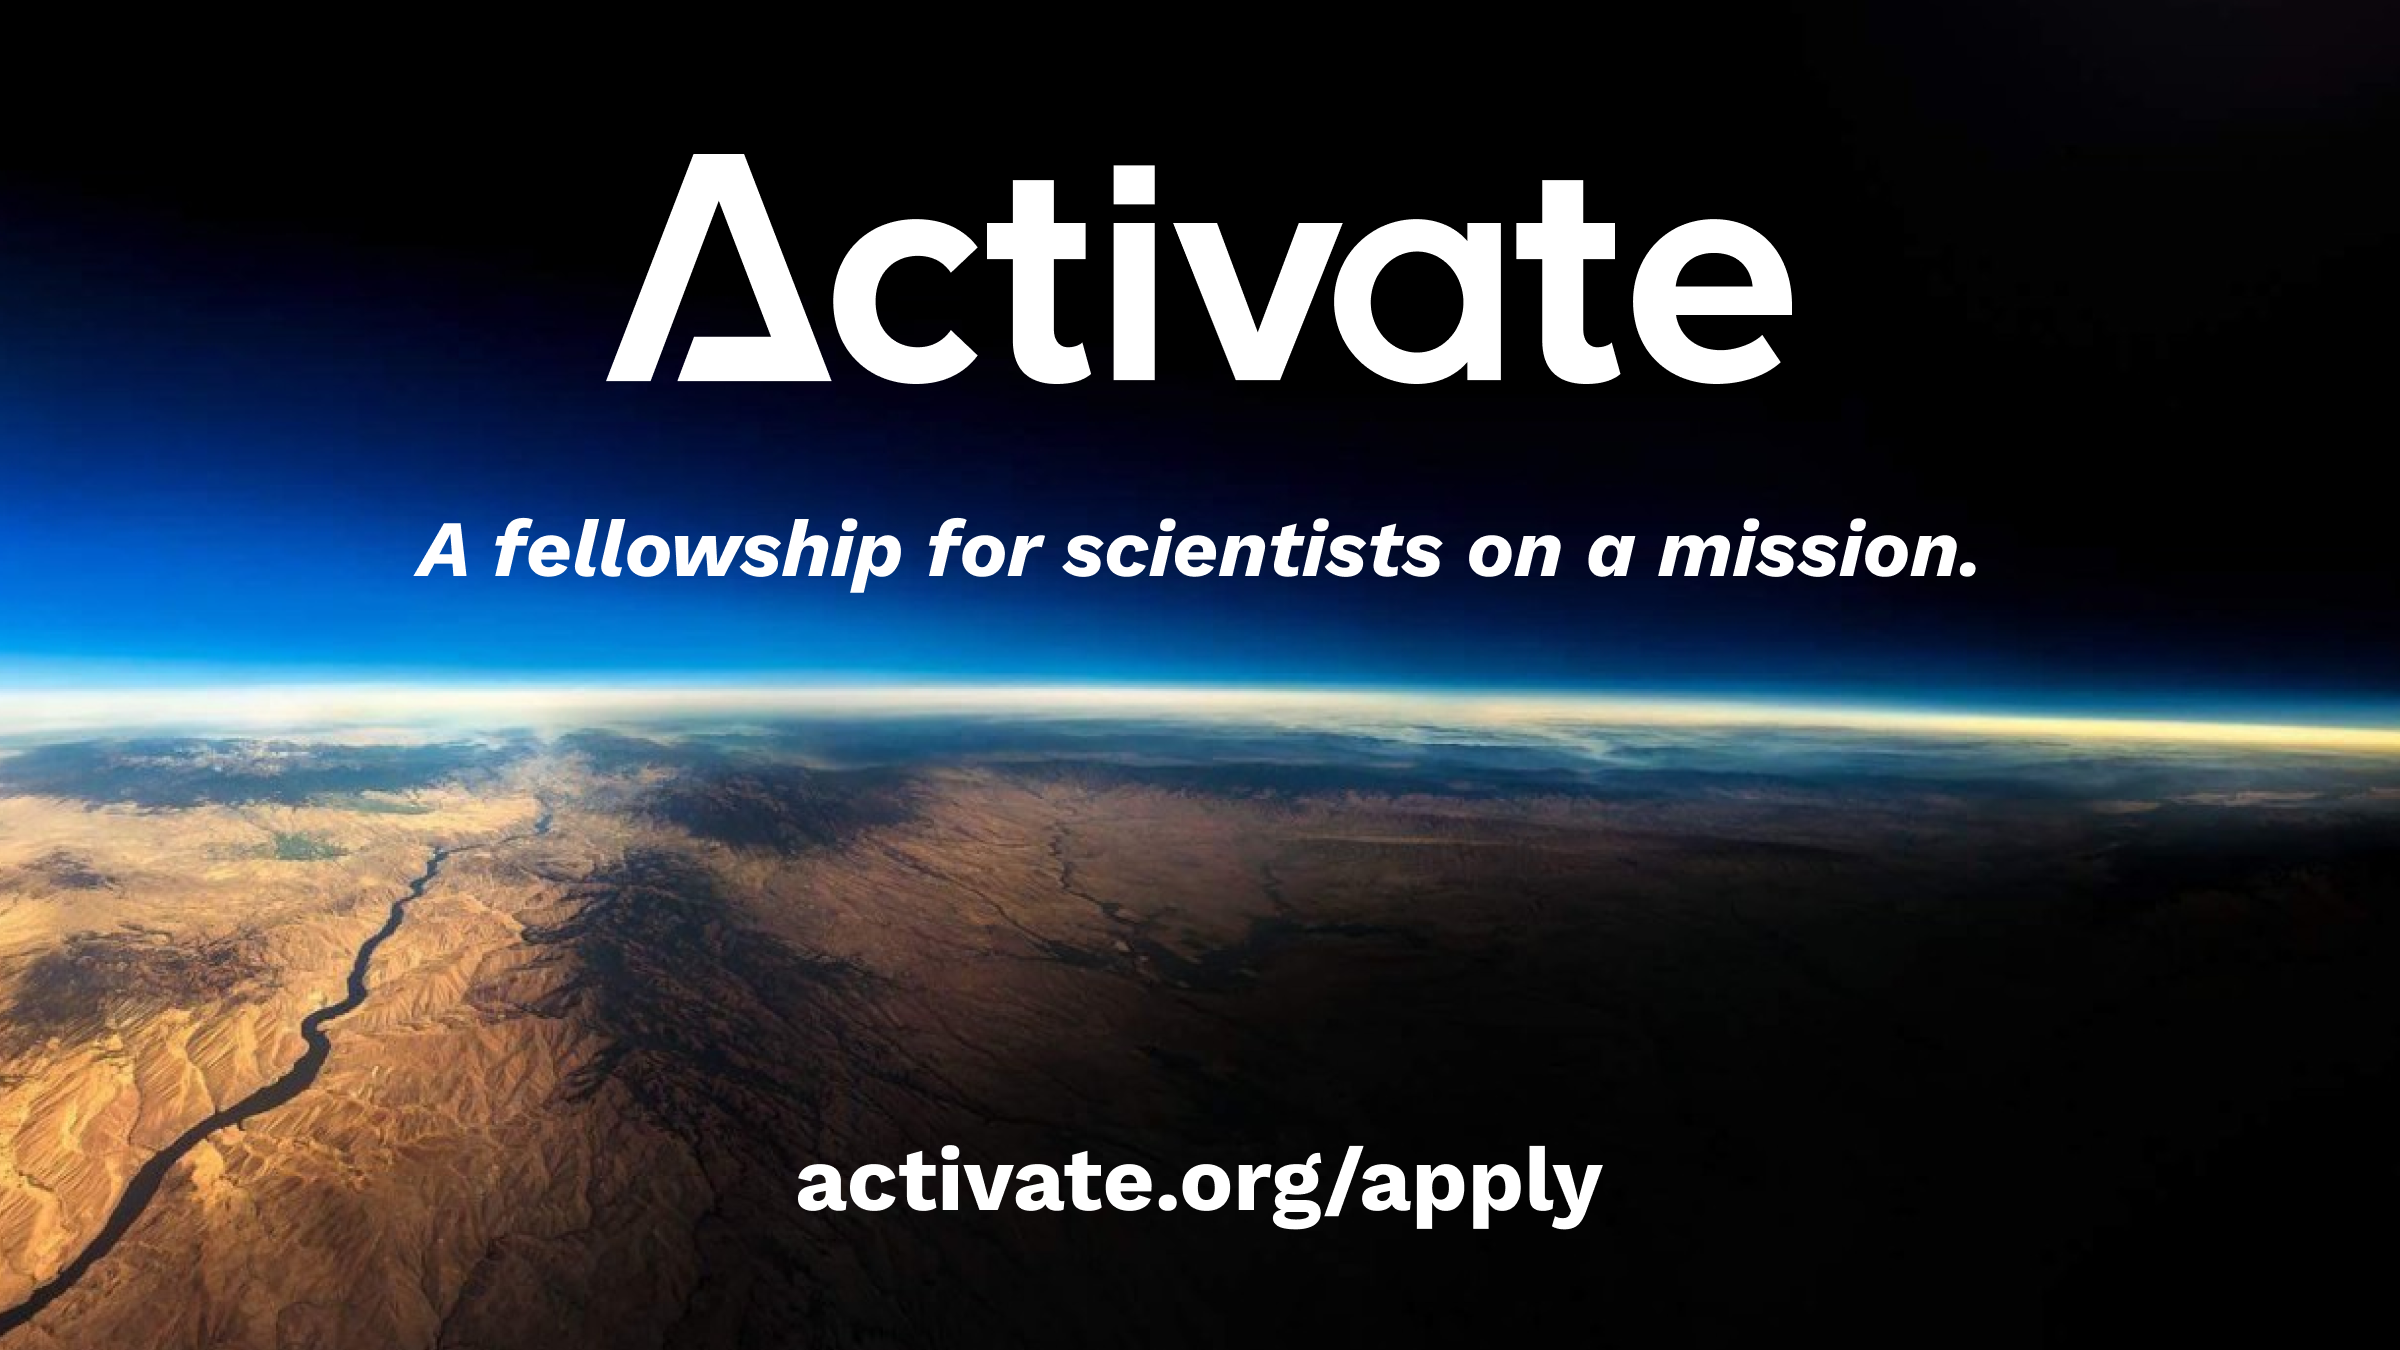 Activate! A fellowship for scientists on a mission.